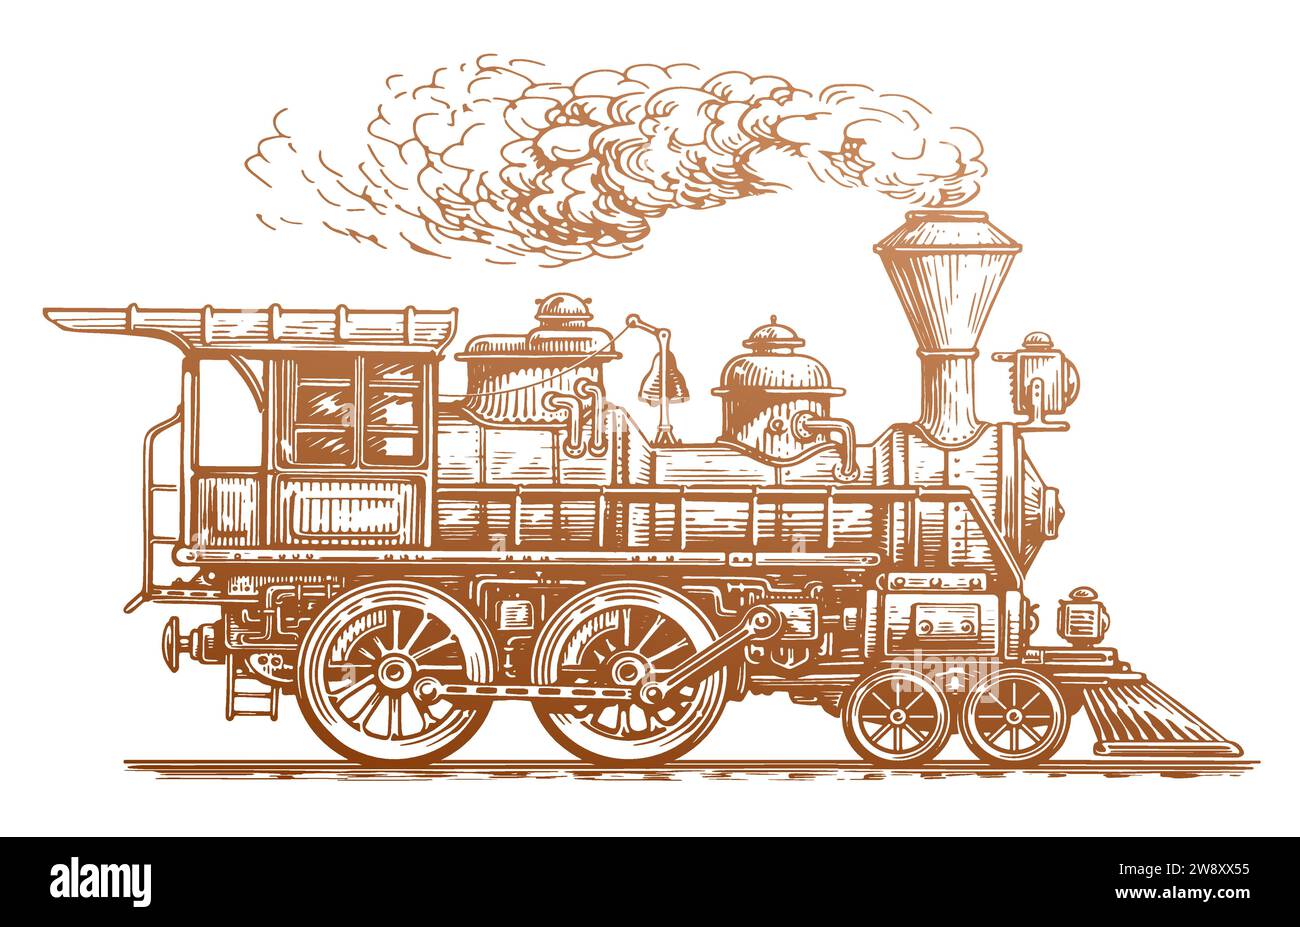 Retro train, side view. Hand drawn vintage steam locomotive in sketch style. Transport vector illustration Stock Vector